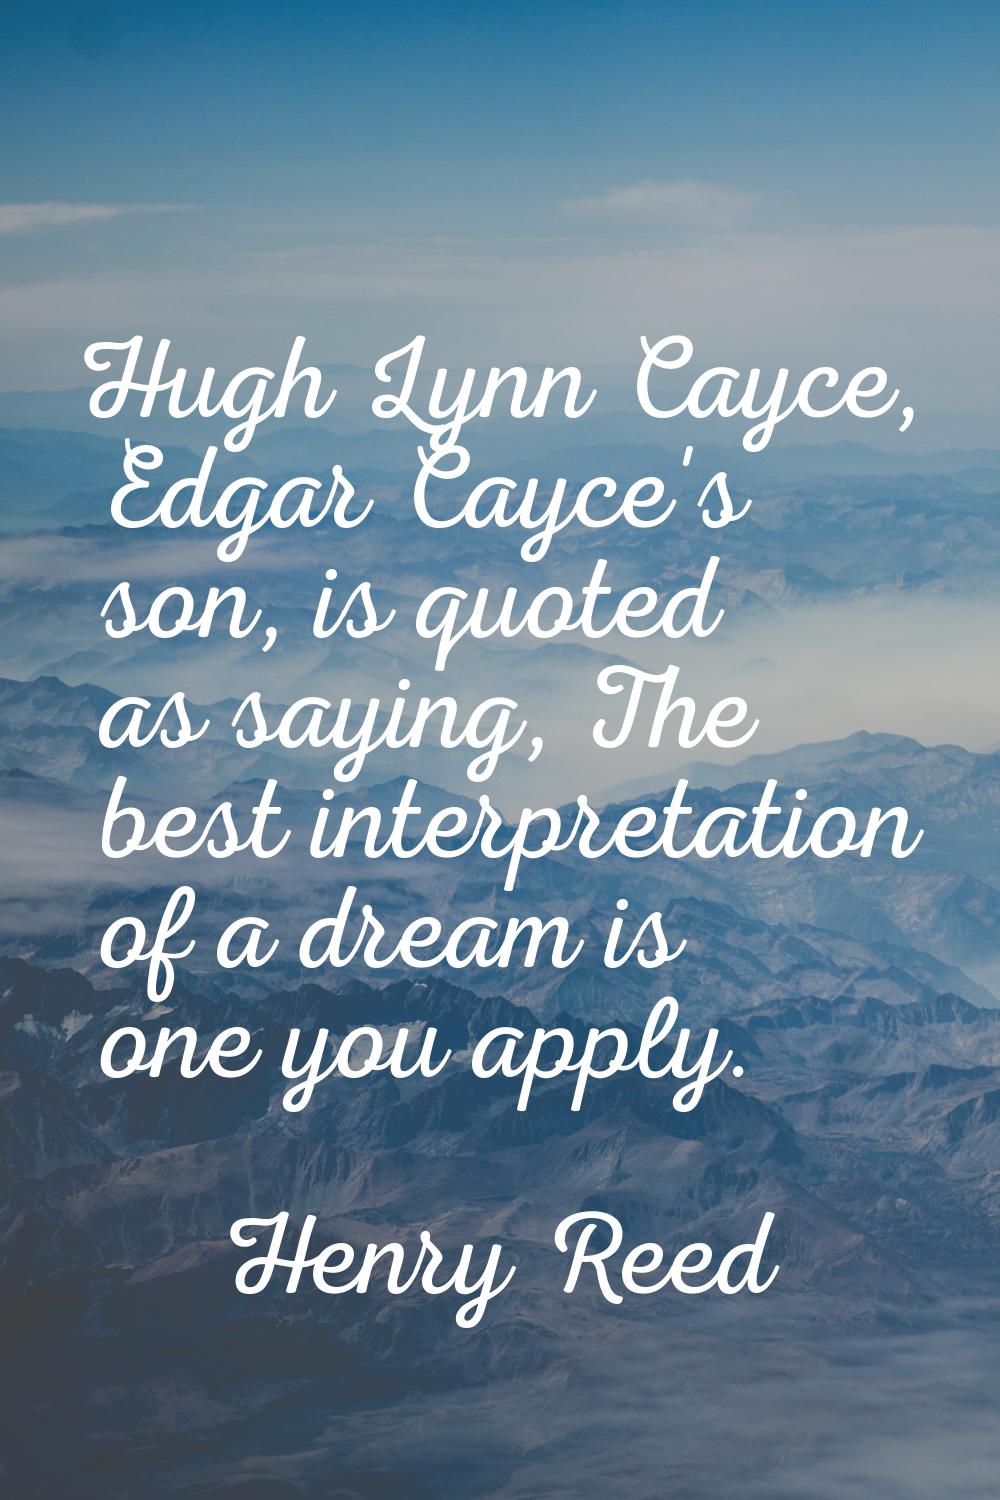 Hugh Lynn Cayce, Edgar Cayce's son, is quoted as saying, The best interpretation of a dream is one 